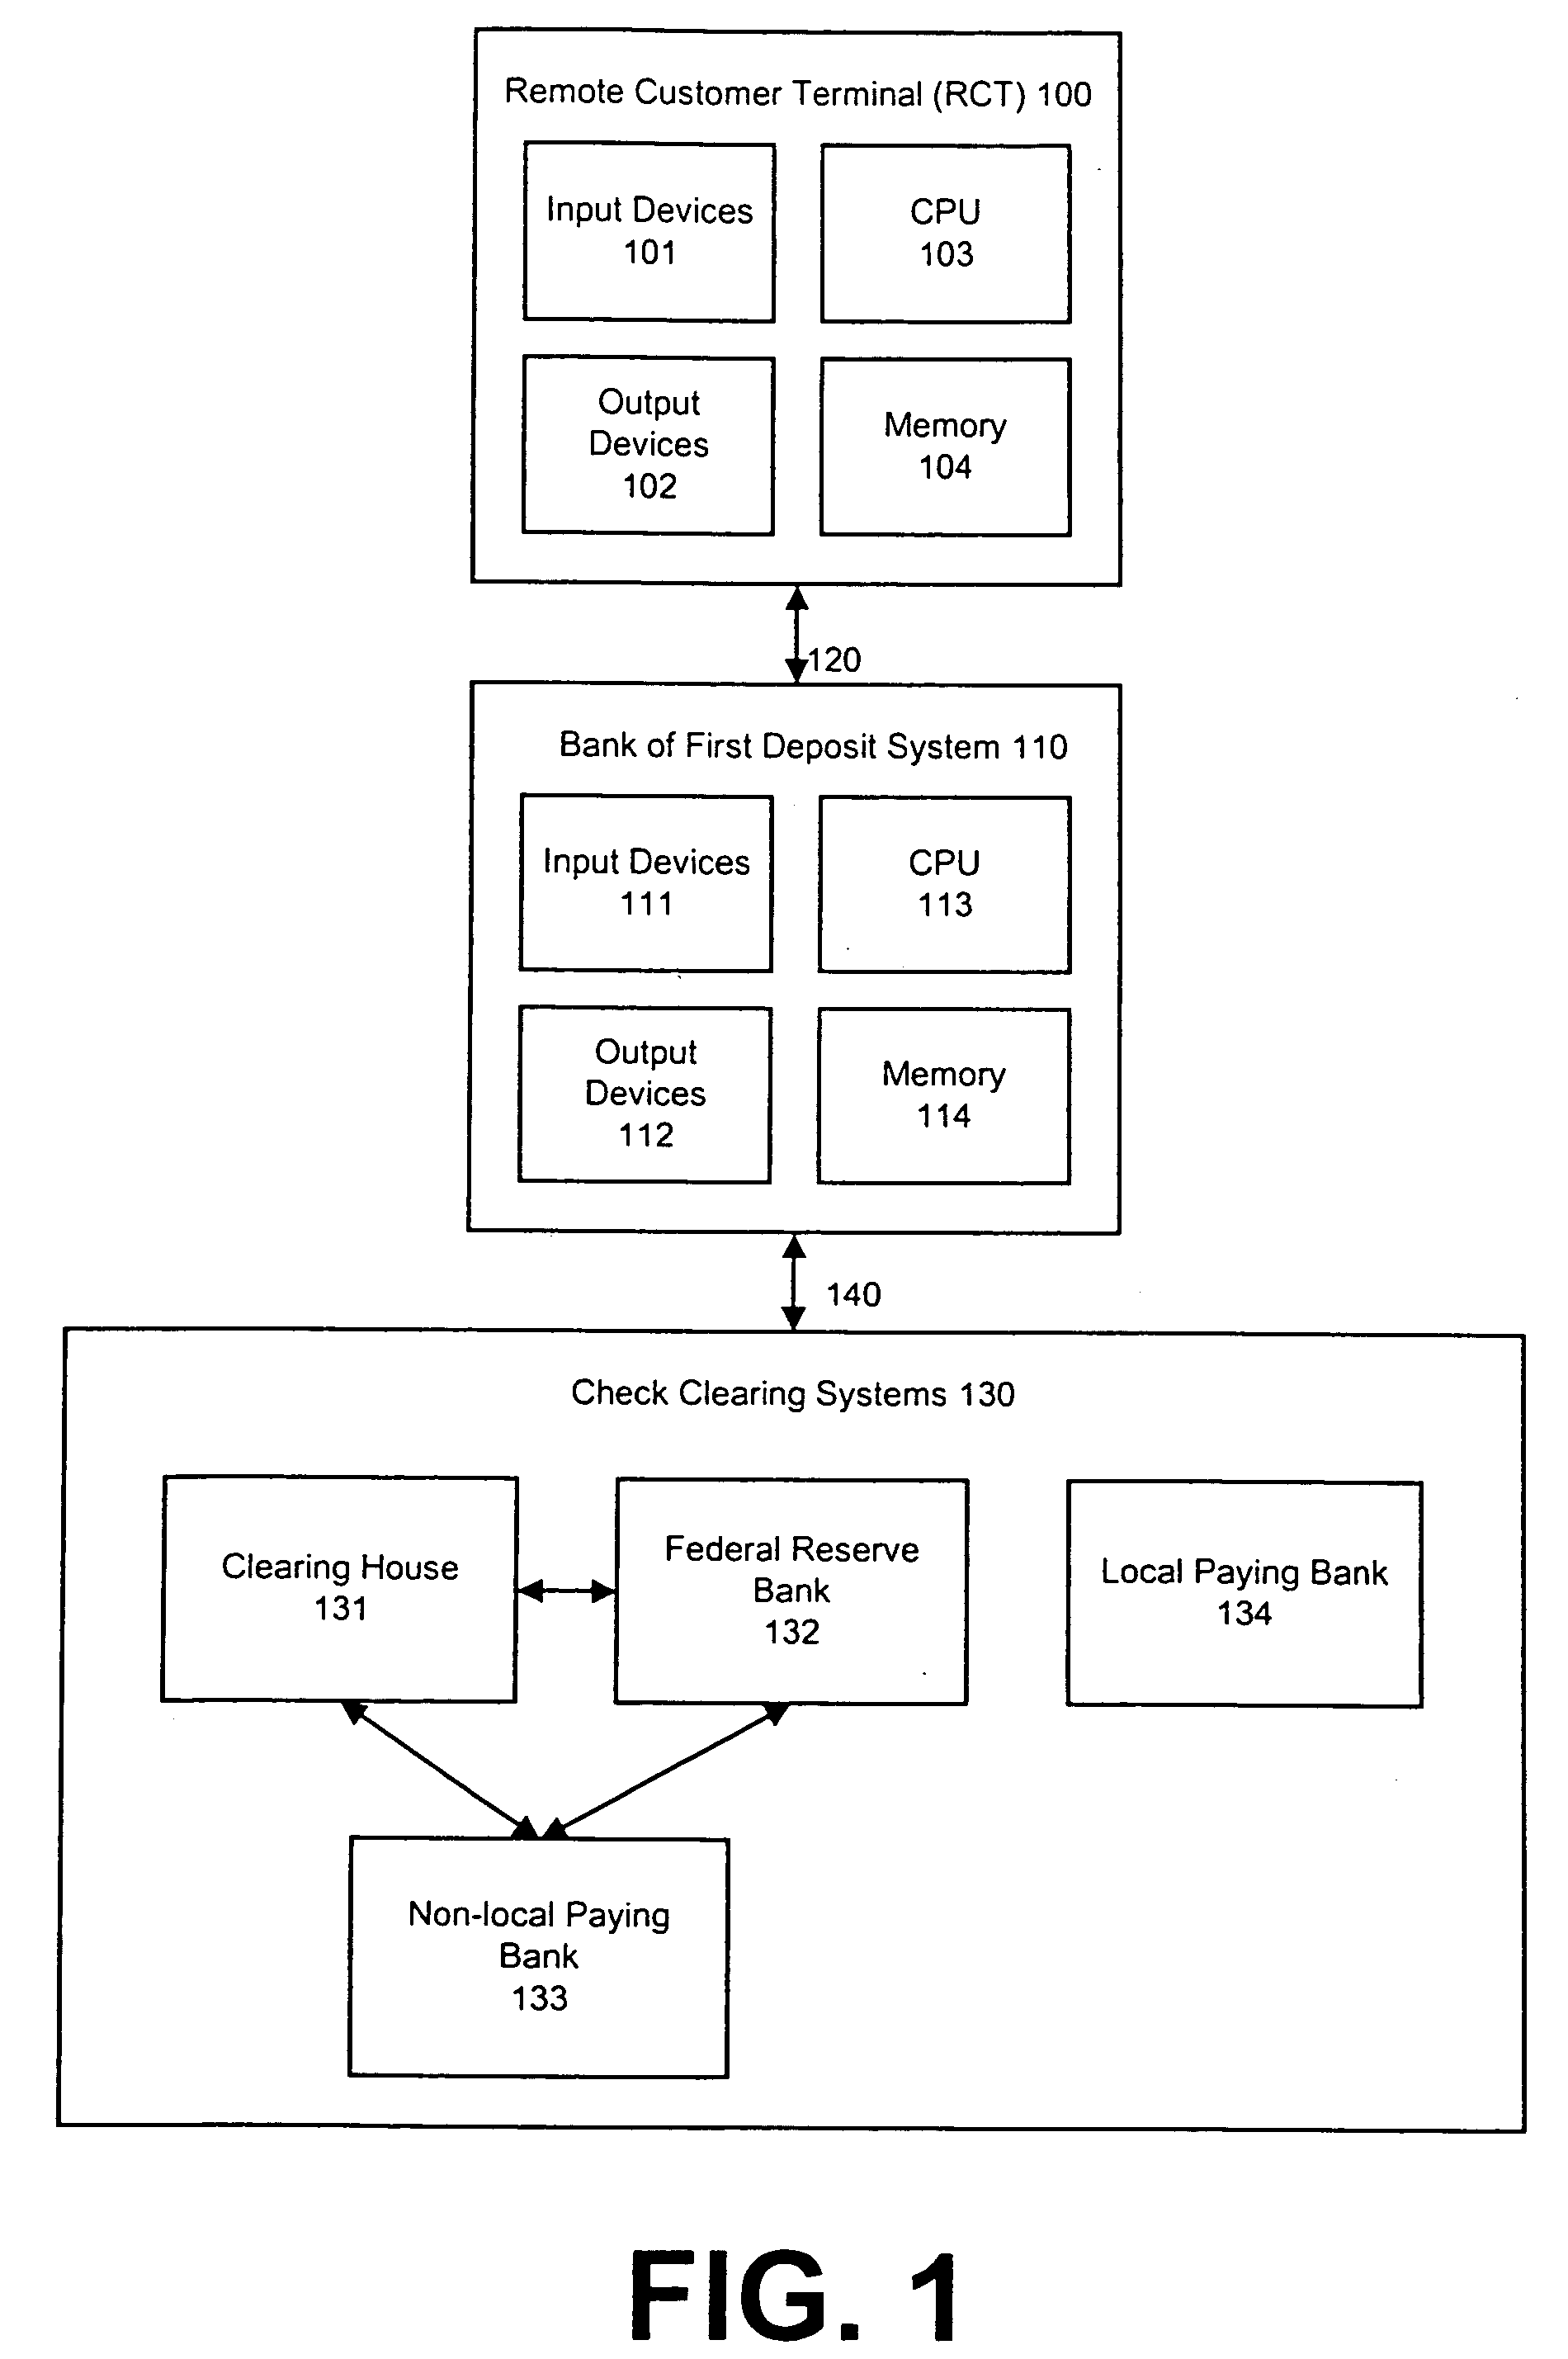 System and method for electronic deposit of third-party checks by non-commercial banking customers from remote locations